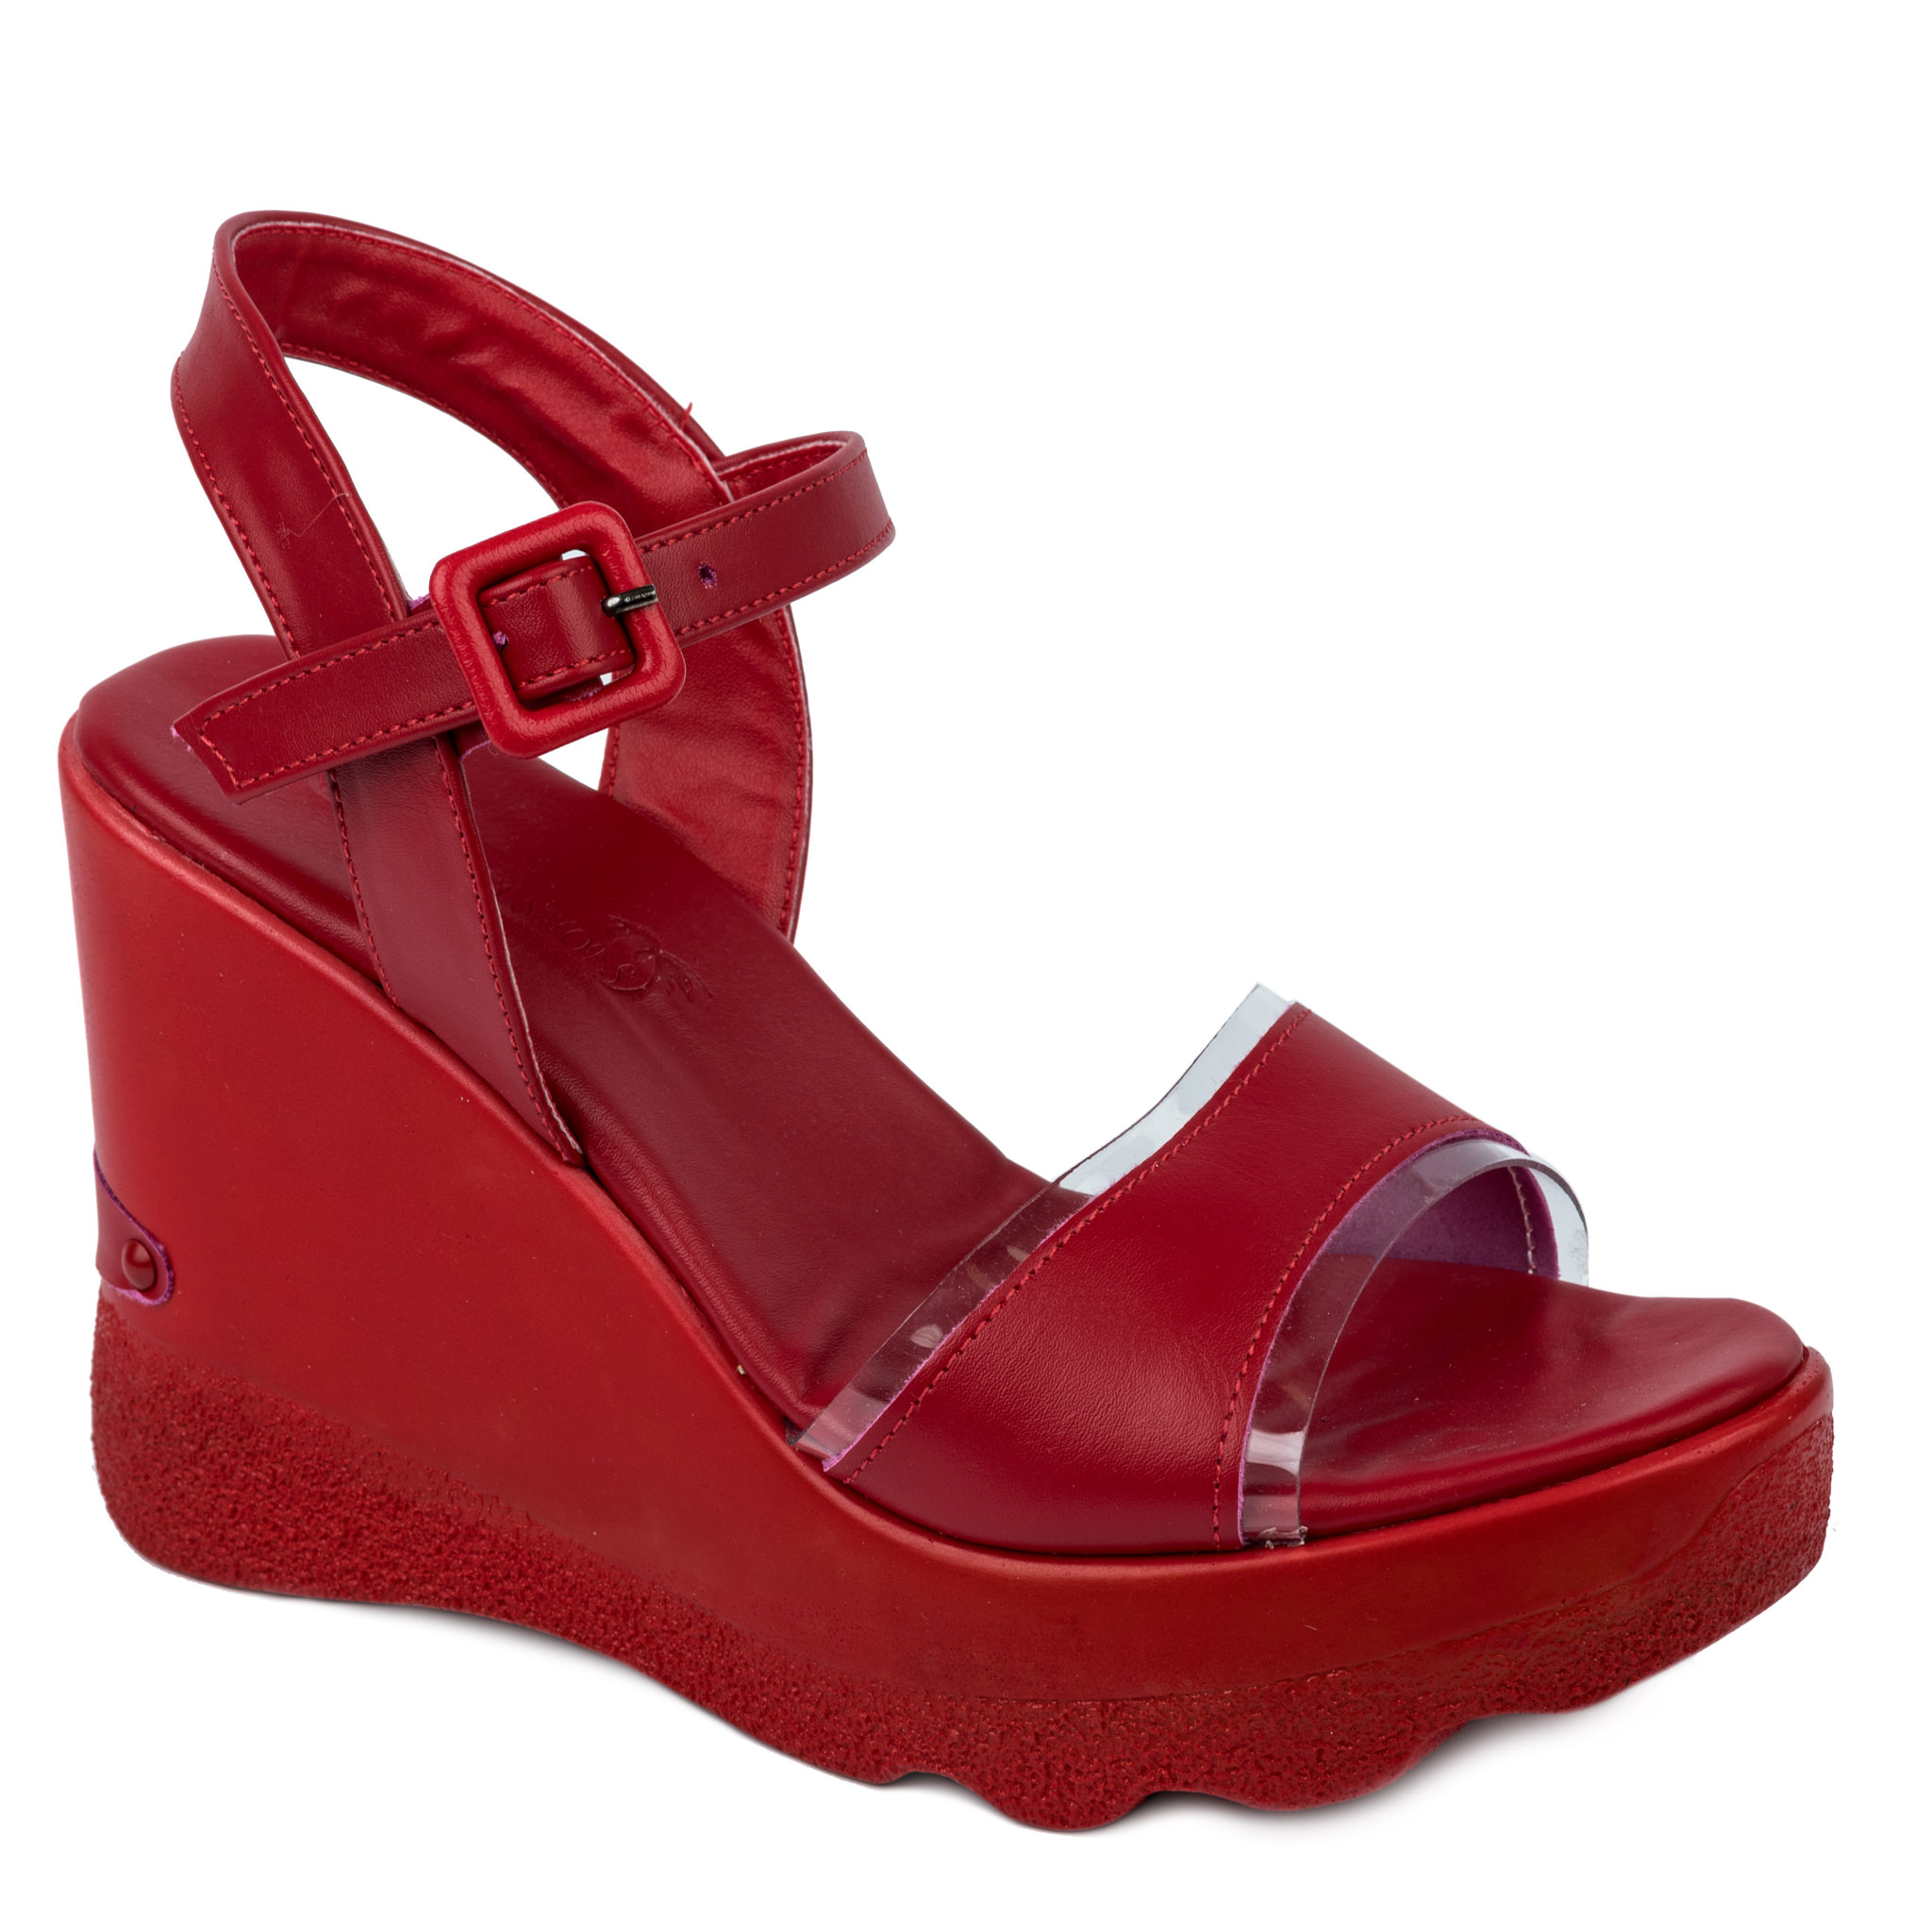 WEDGE SANDALS - RED